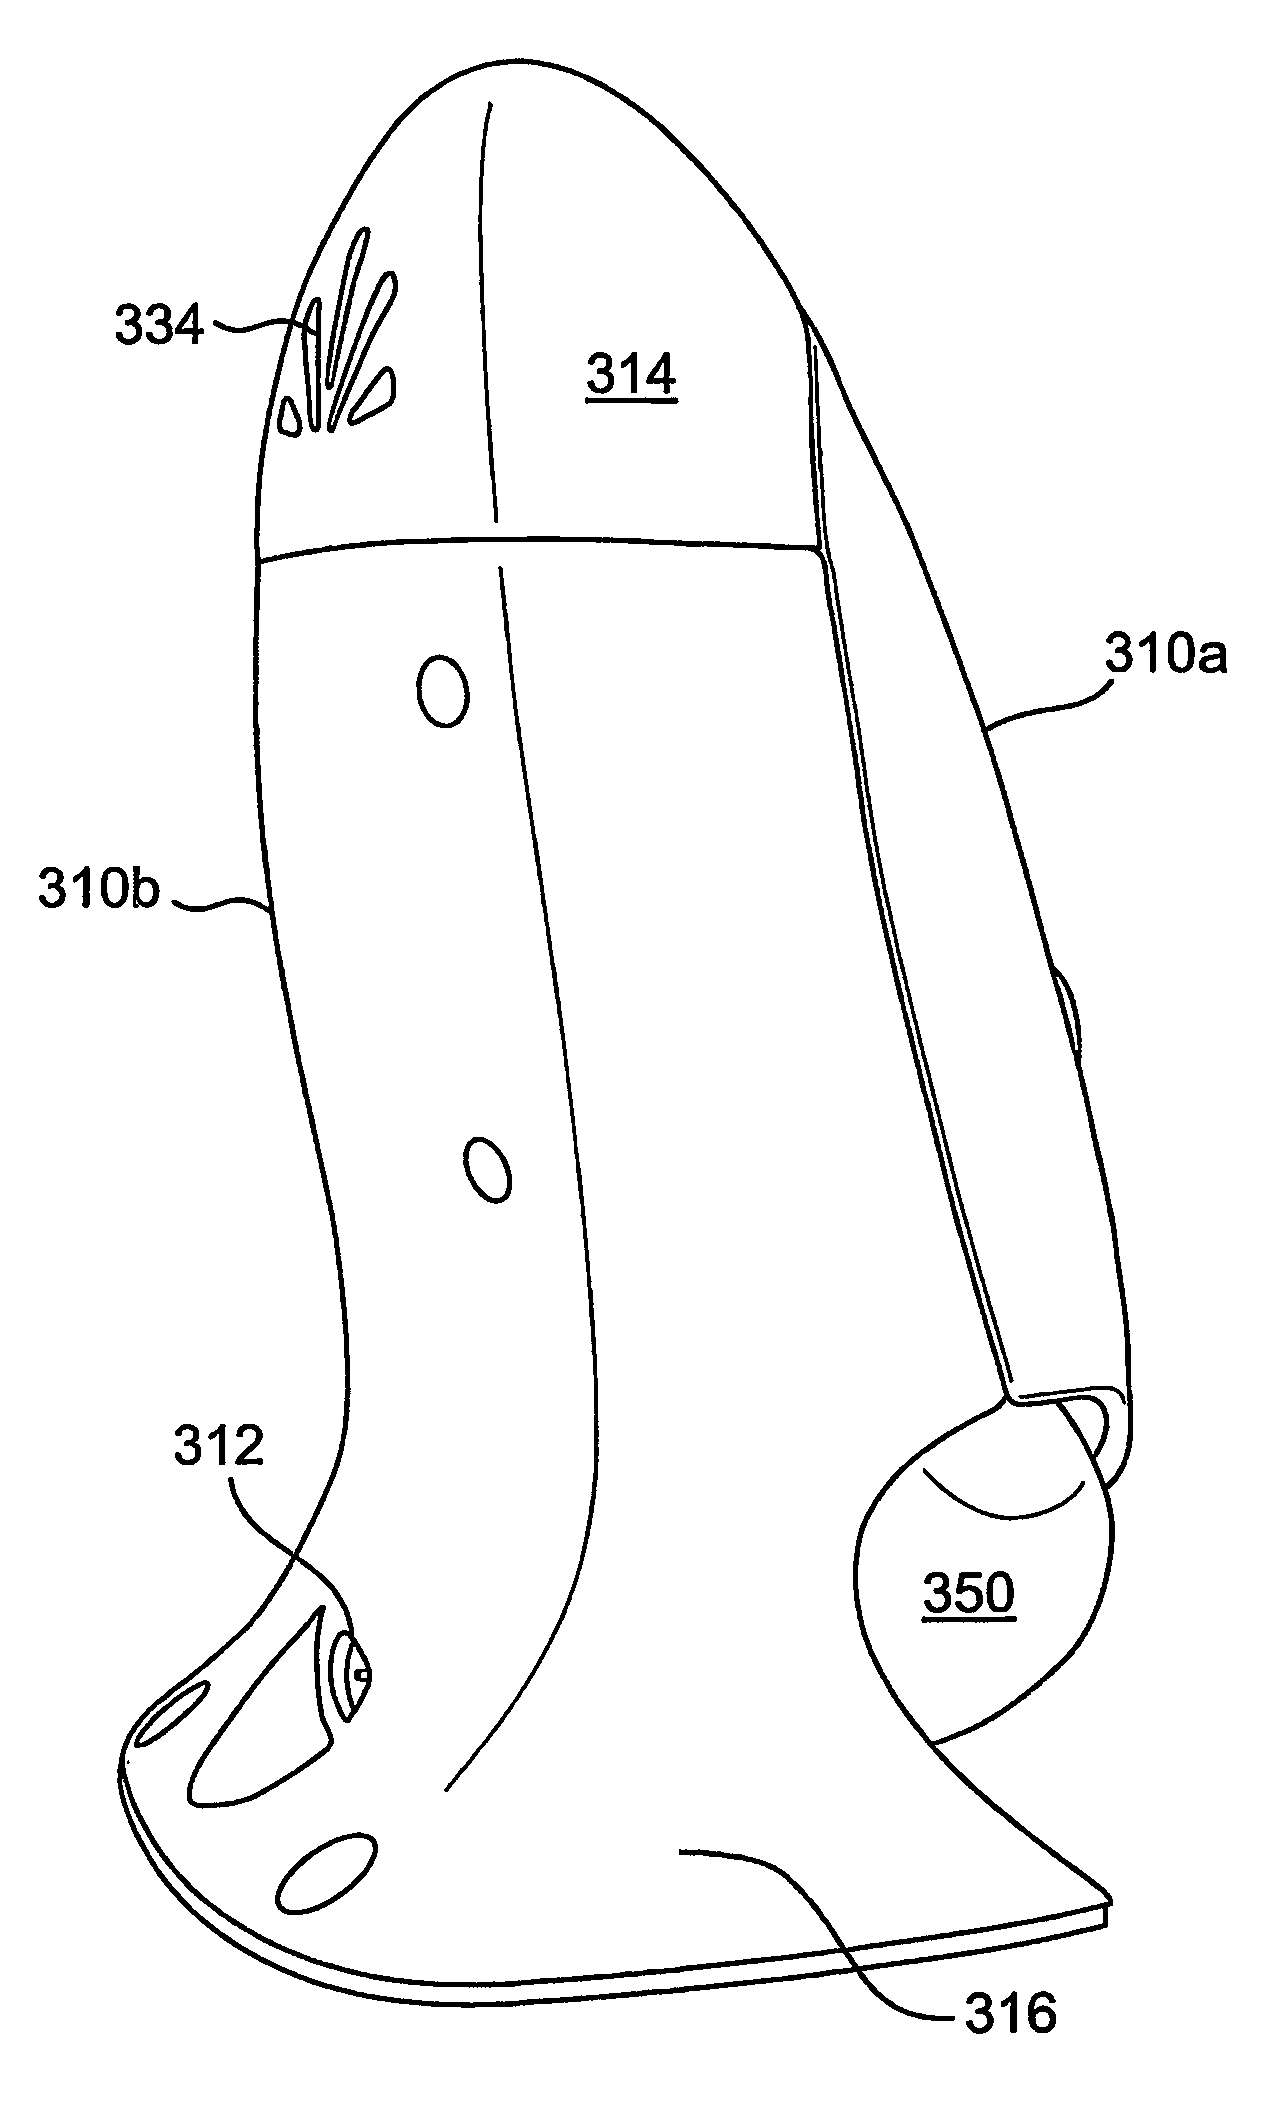 Diffuser with light emitting diode nightlight